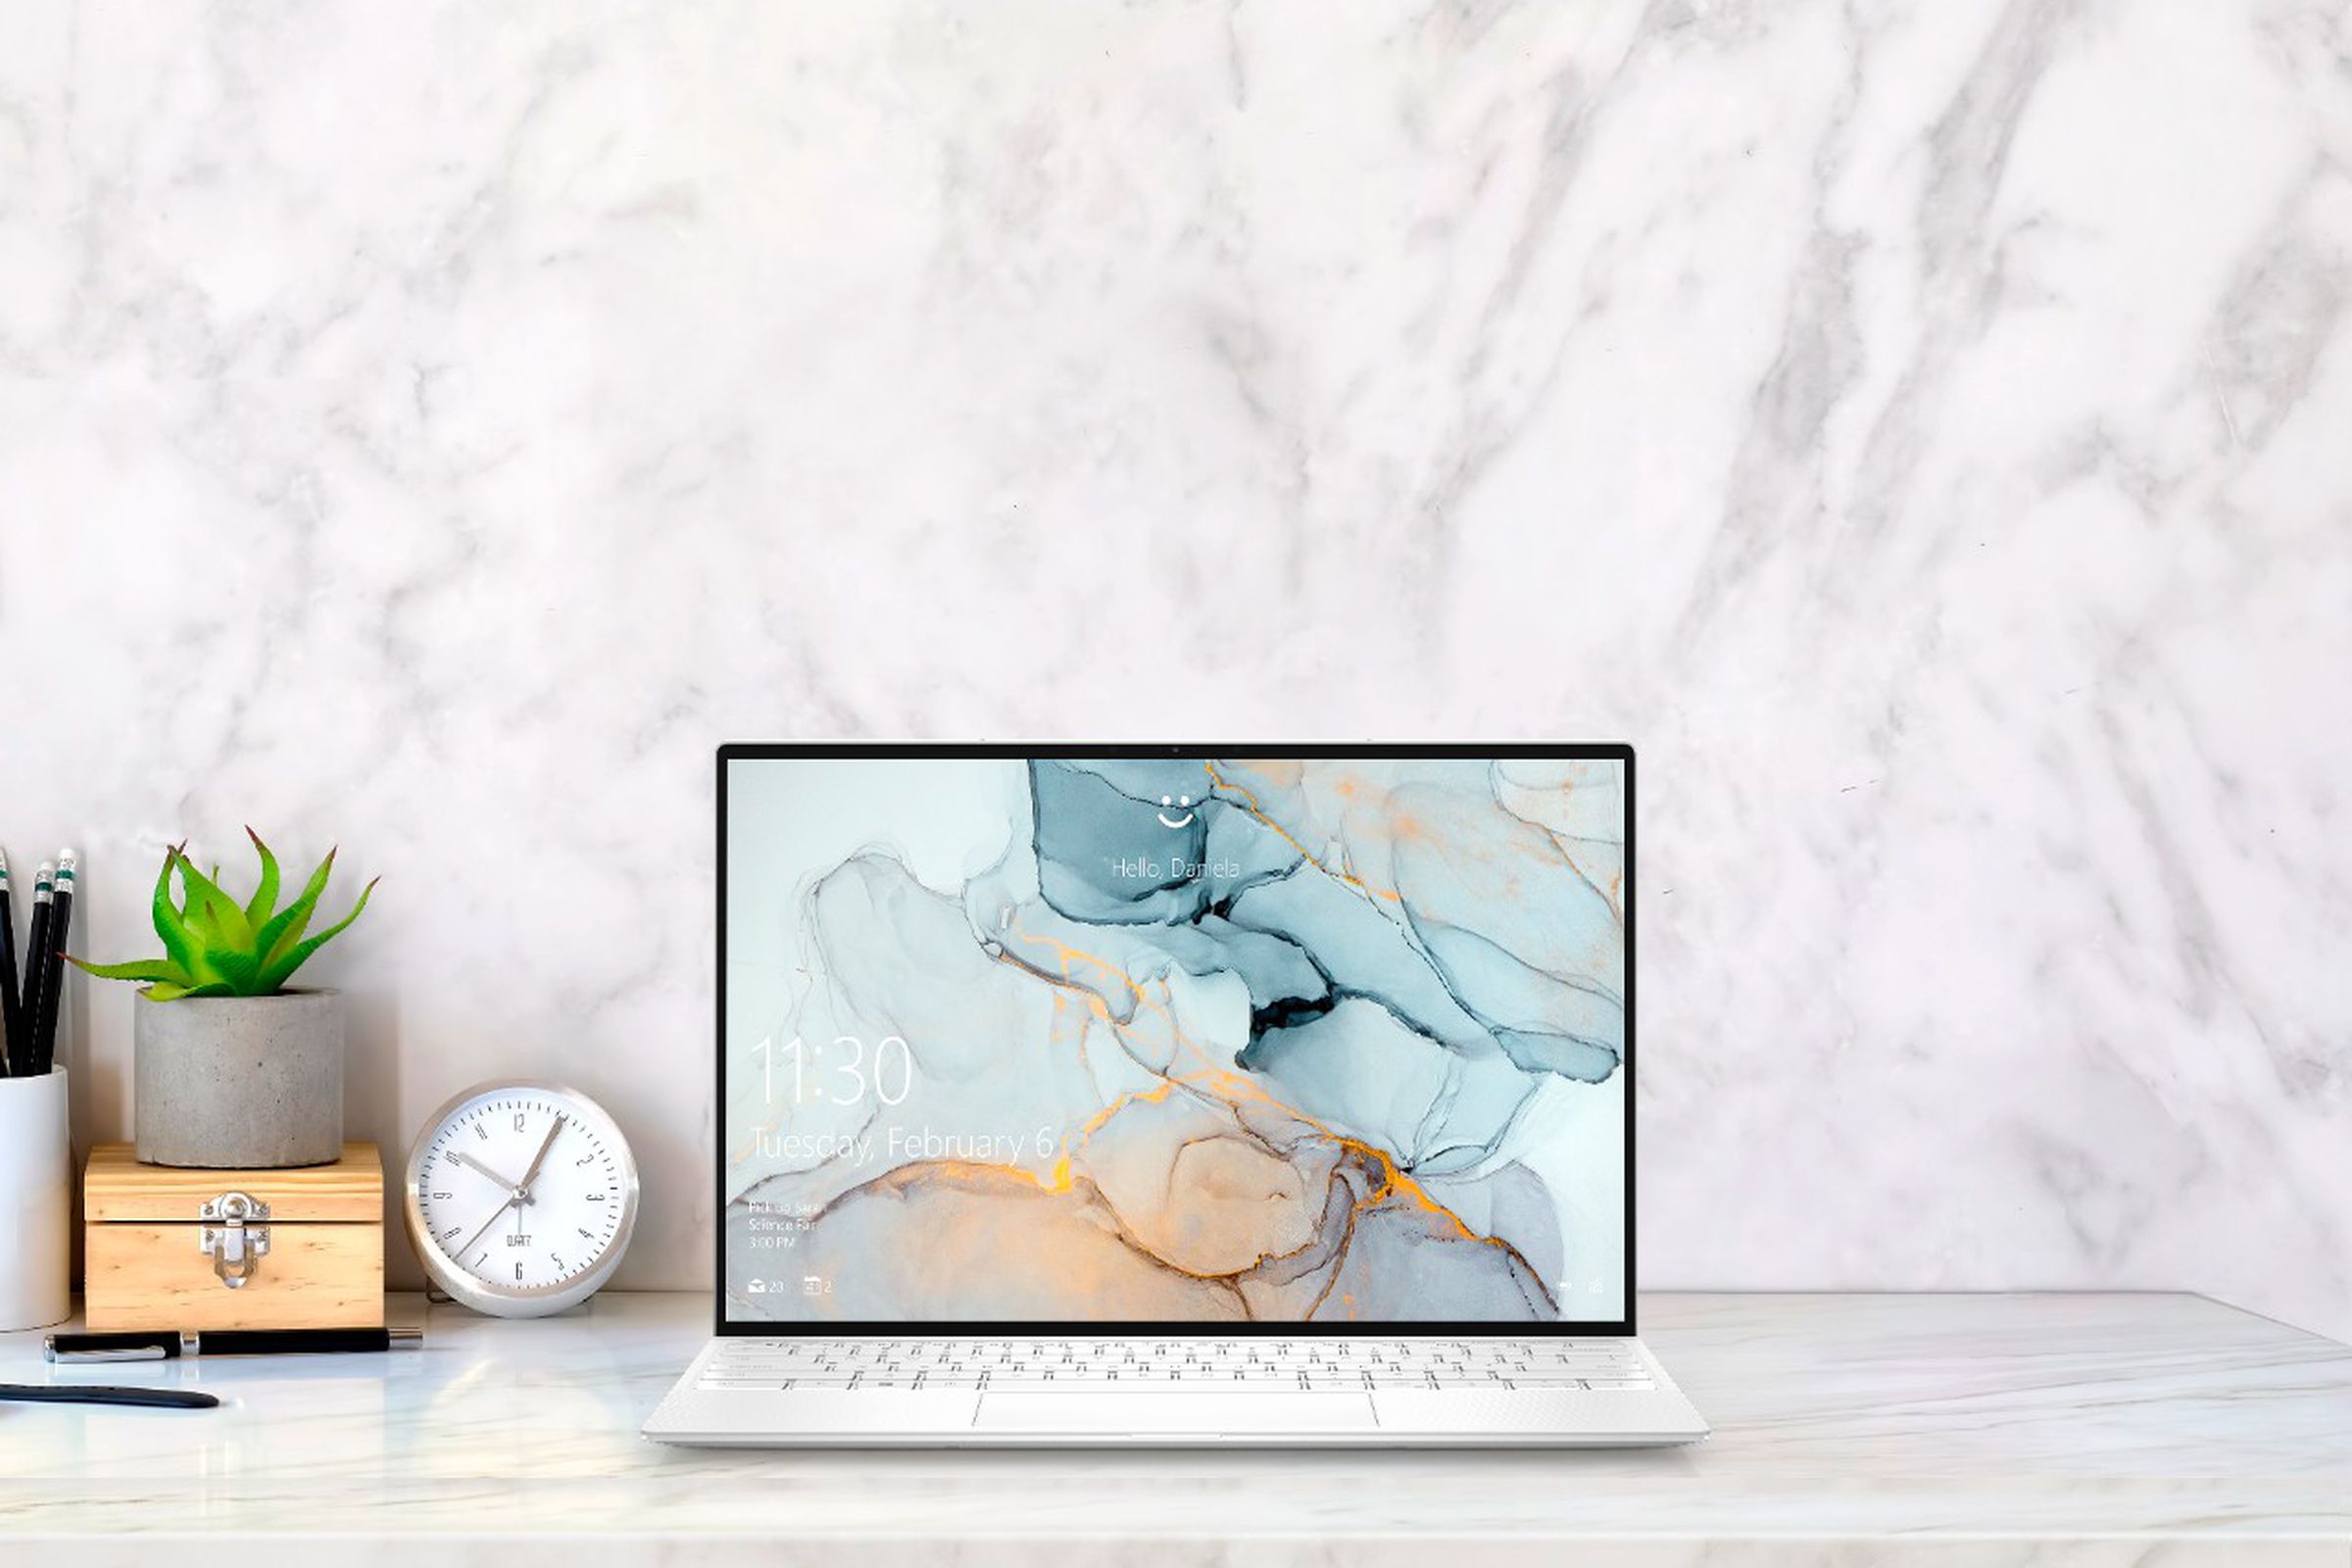 The Dell XPS 13 sits on a desk with a marble background.